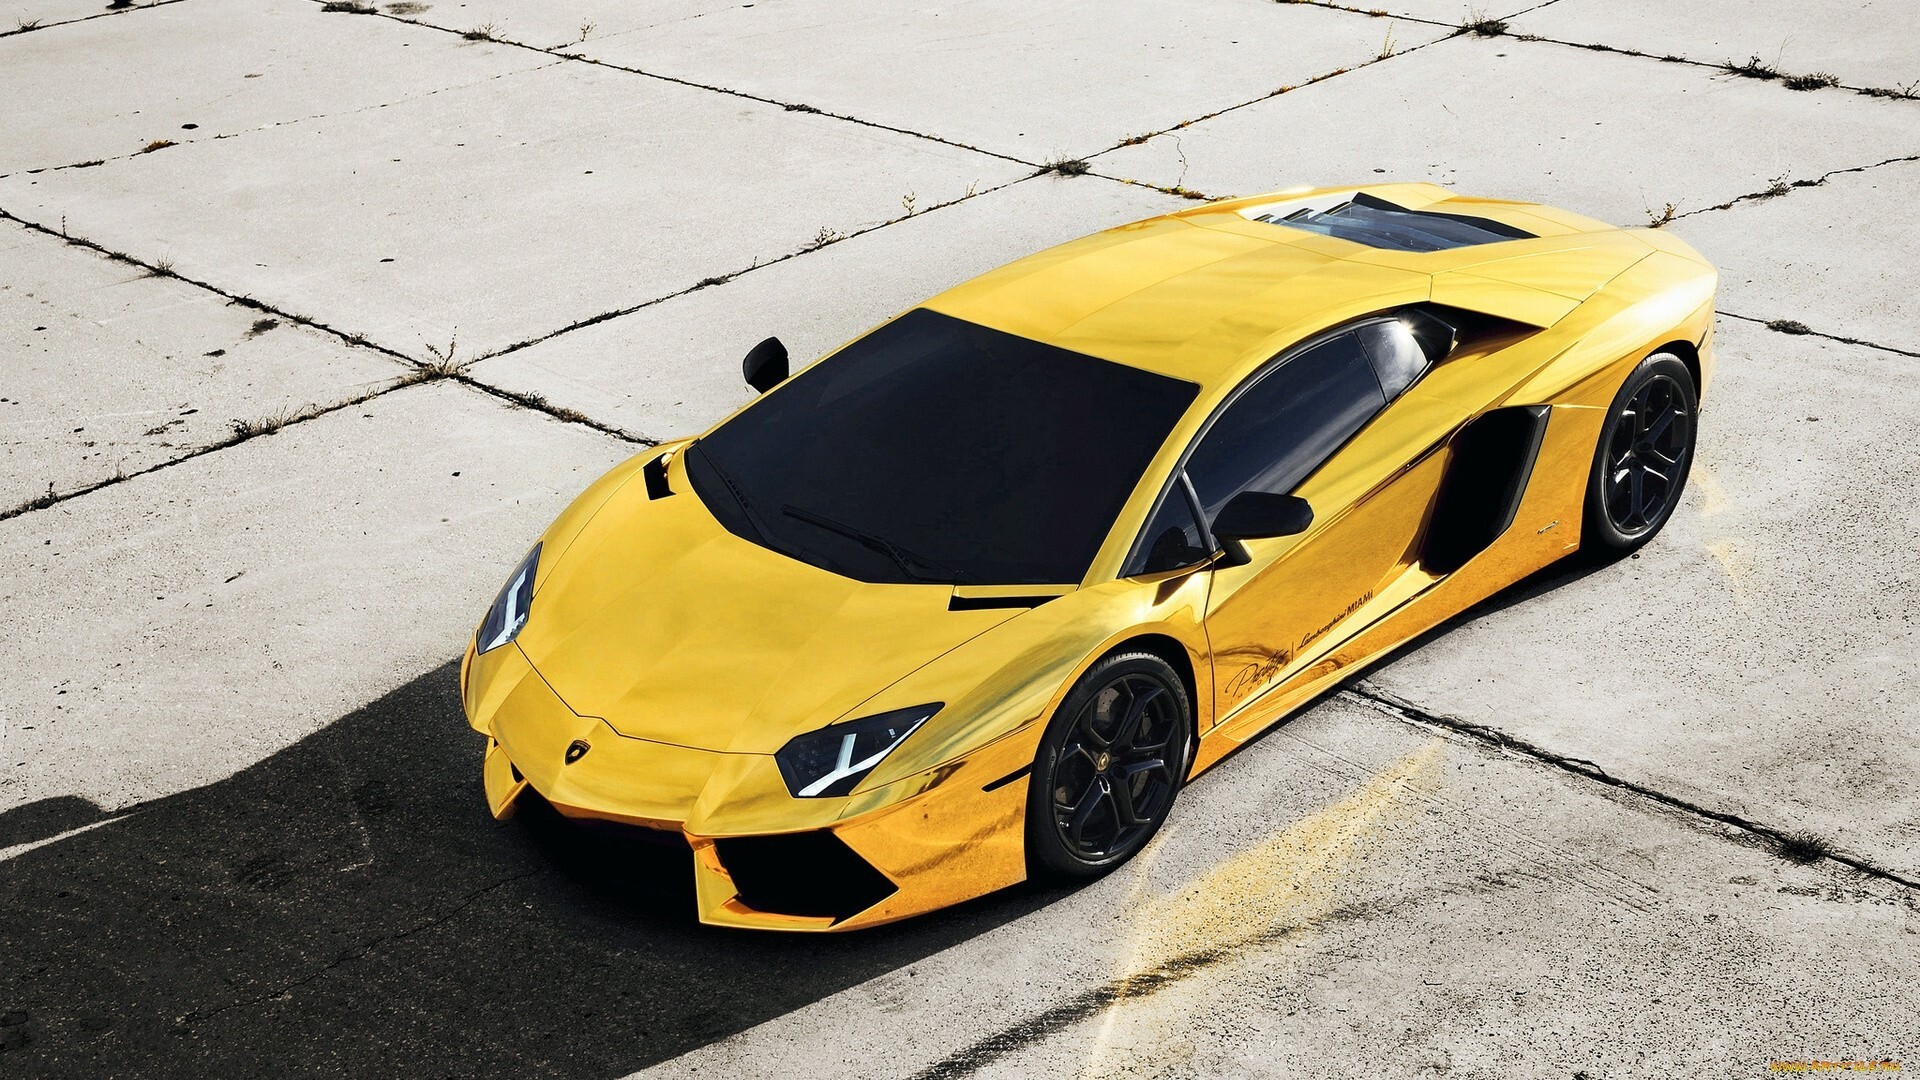 Gold Lamborghini: Aventador, One of the most popular models of the luxury Italian sports cars. 1920x1080 Full HD Background.